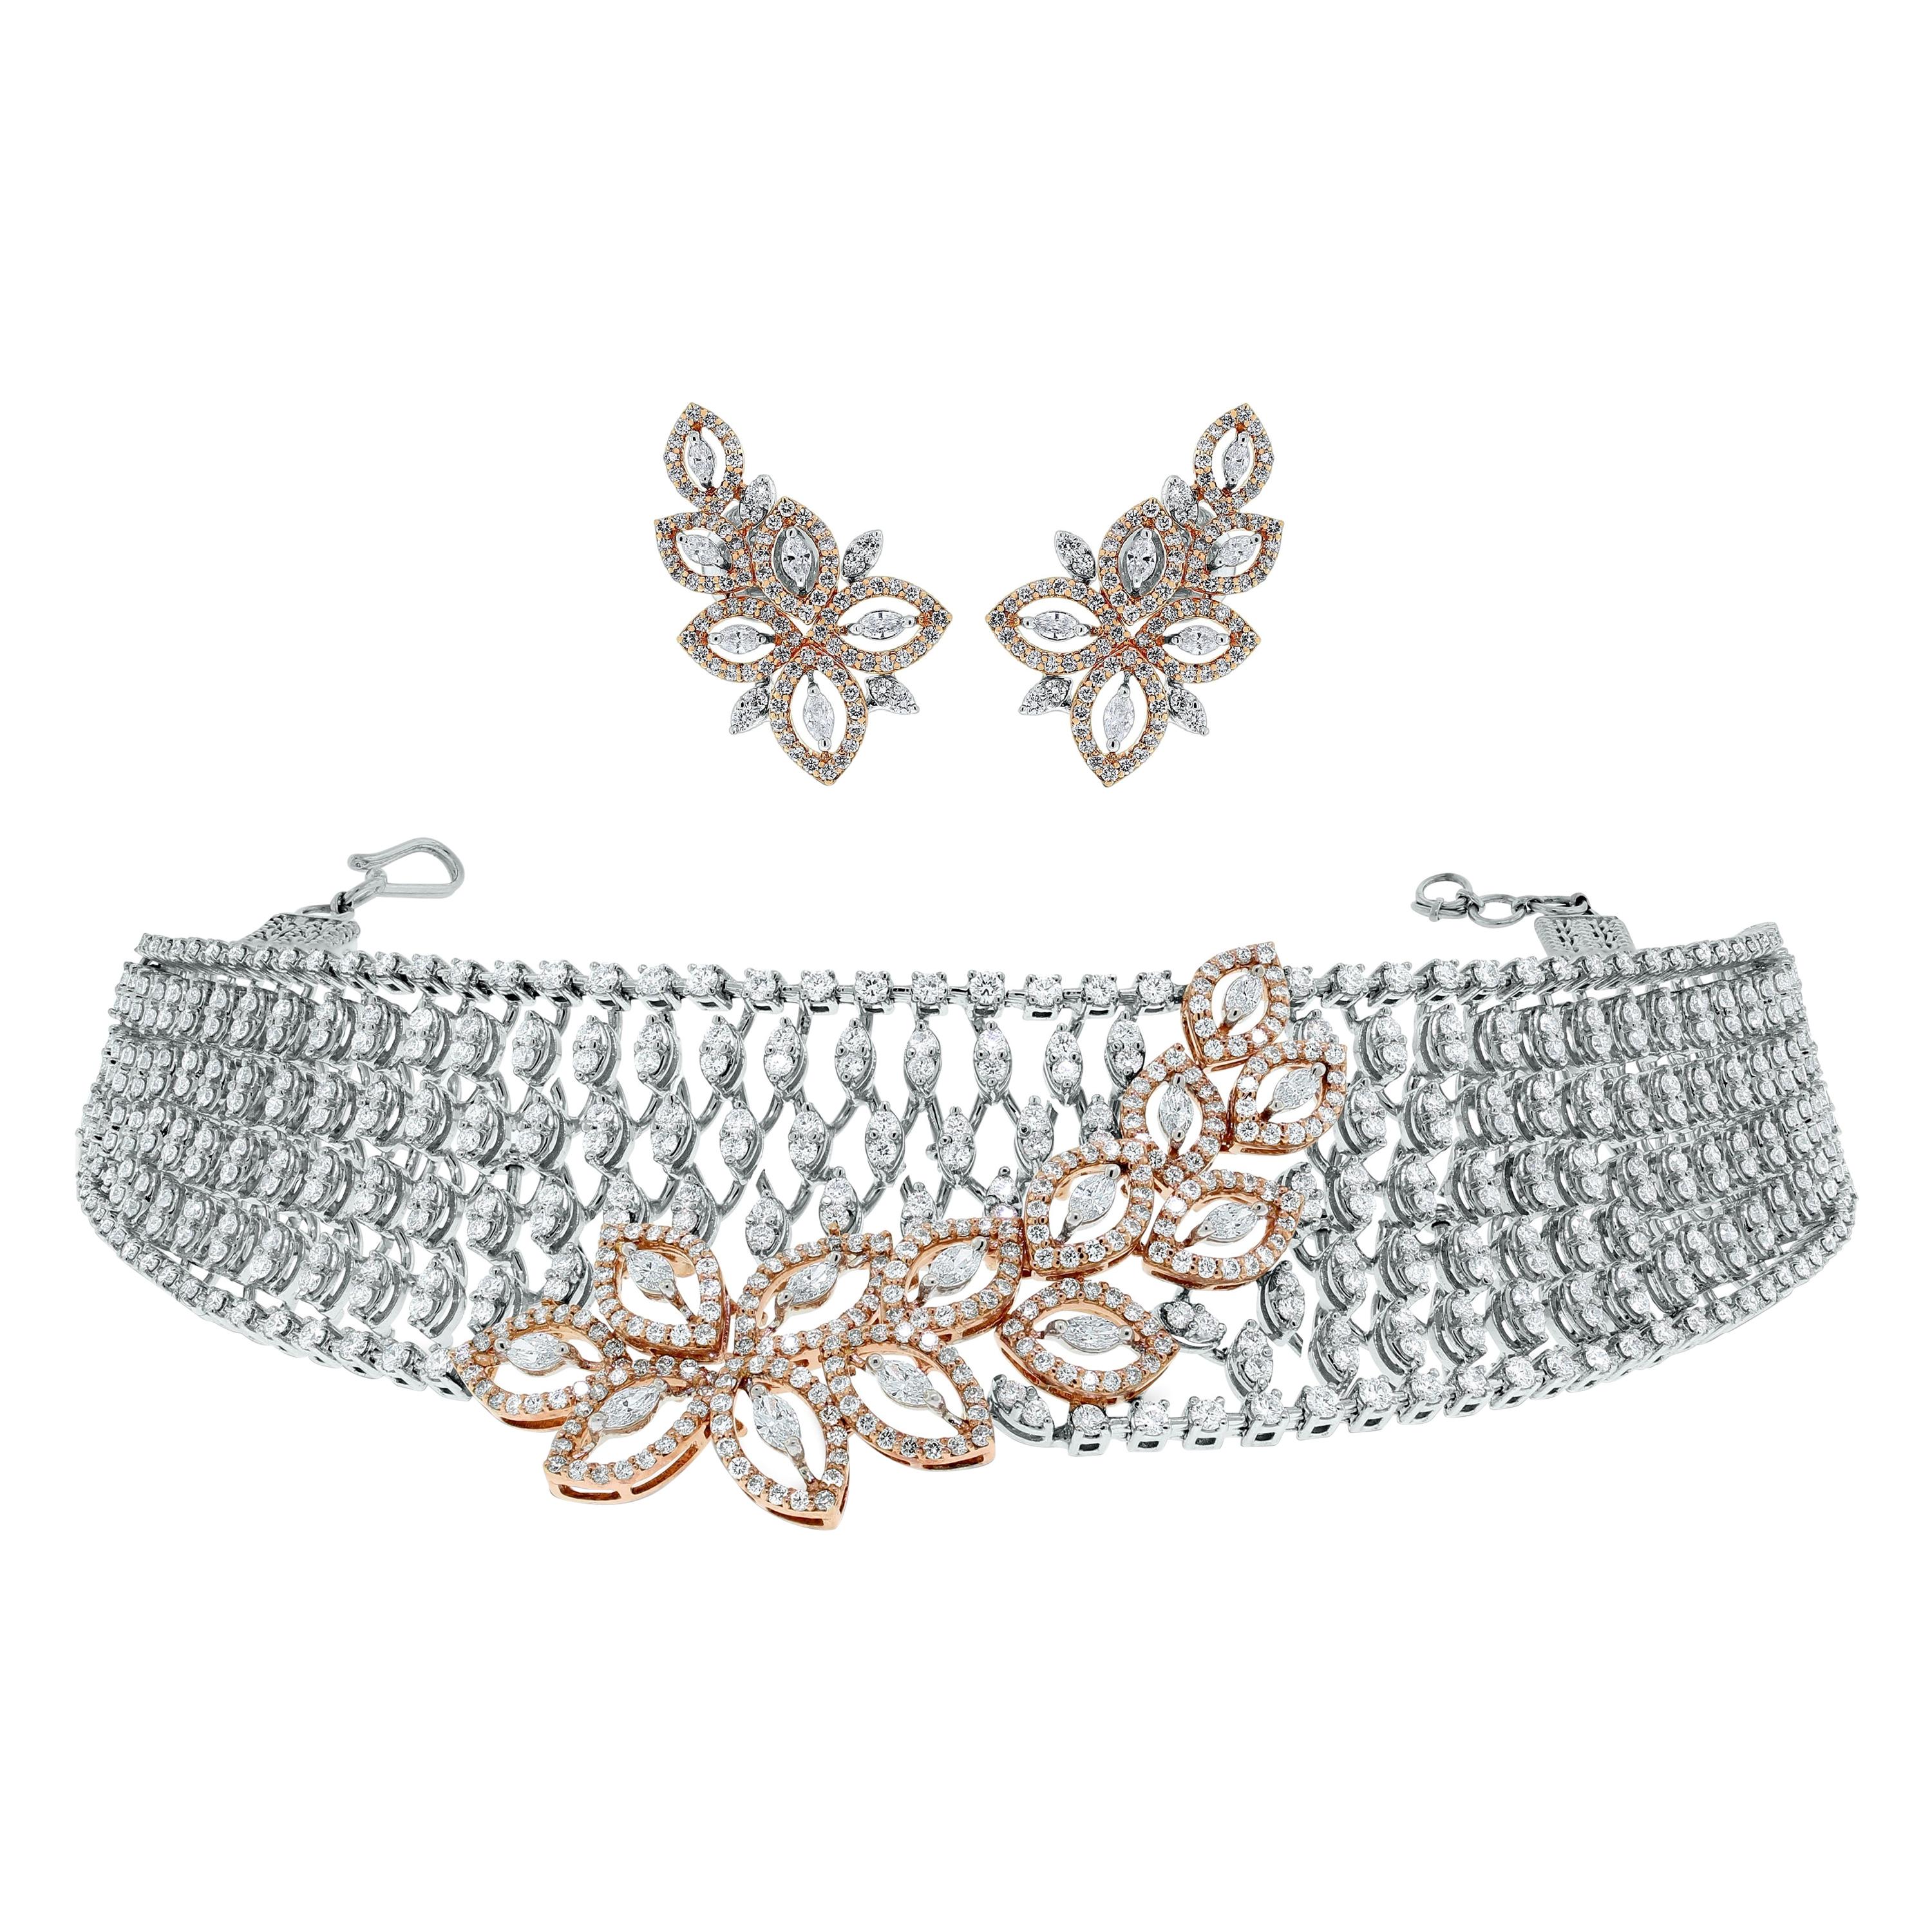 The Beauvince Gaia Diamond Choker Necklace is delicate & sensual celebrating the blossoming of spring. 

Total Diamond Weight: 7.97 ct
Diamond Color: H - I 
Diamond Clarity: VS - SI (Very Slightly Included - Slightly Included) 

Metal: 18K Rose &